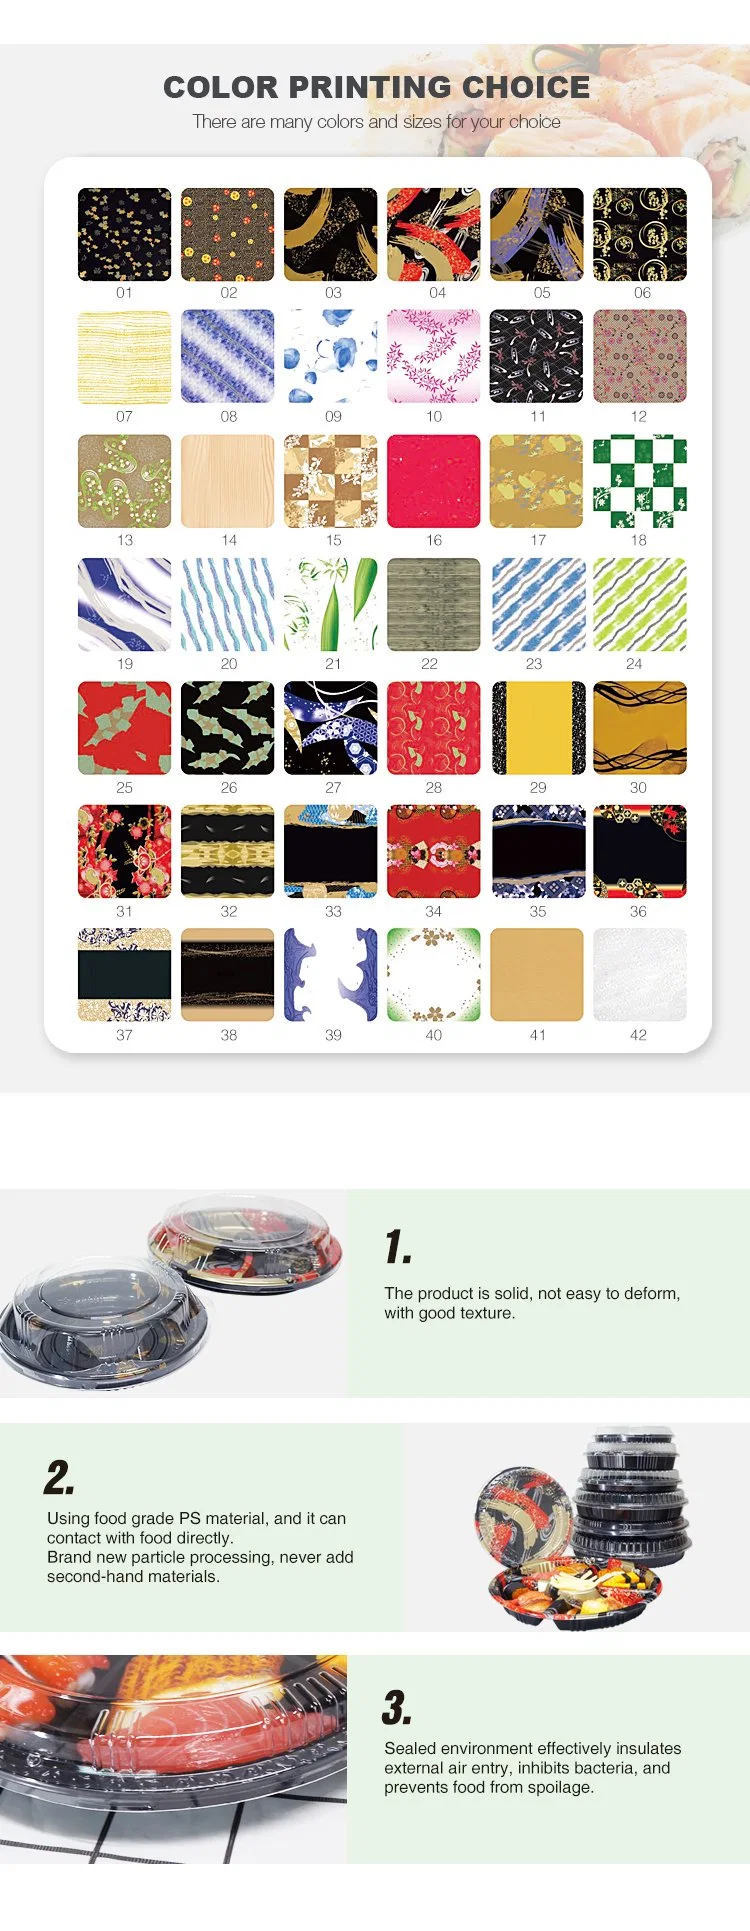 Takeaway Sushi PS Tray Cake Boxes Package Wholesale Different Size Round Boxes PP Tray with Pet Lid